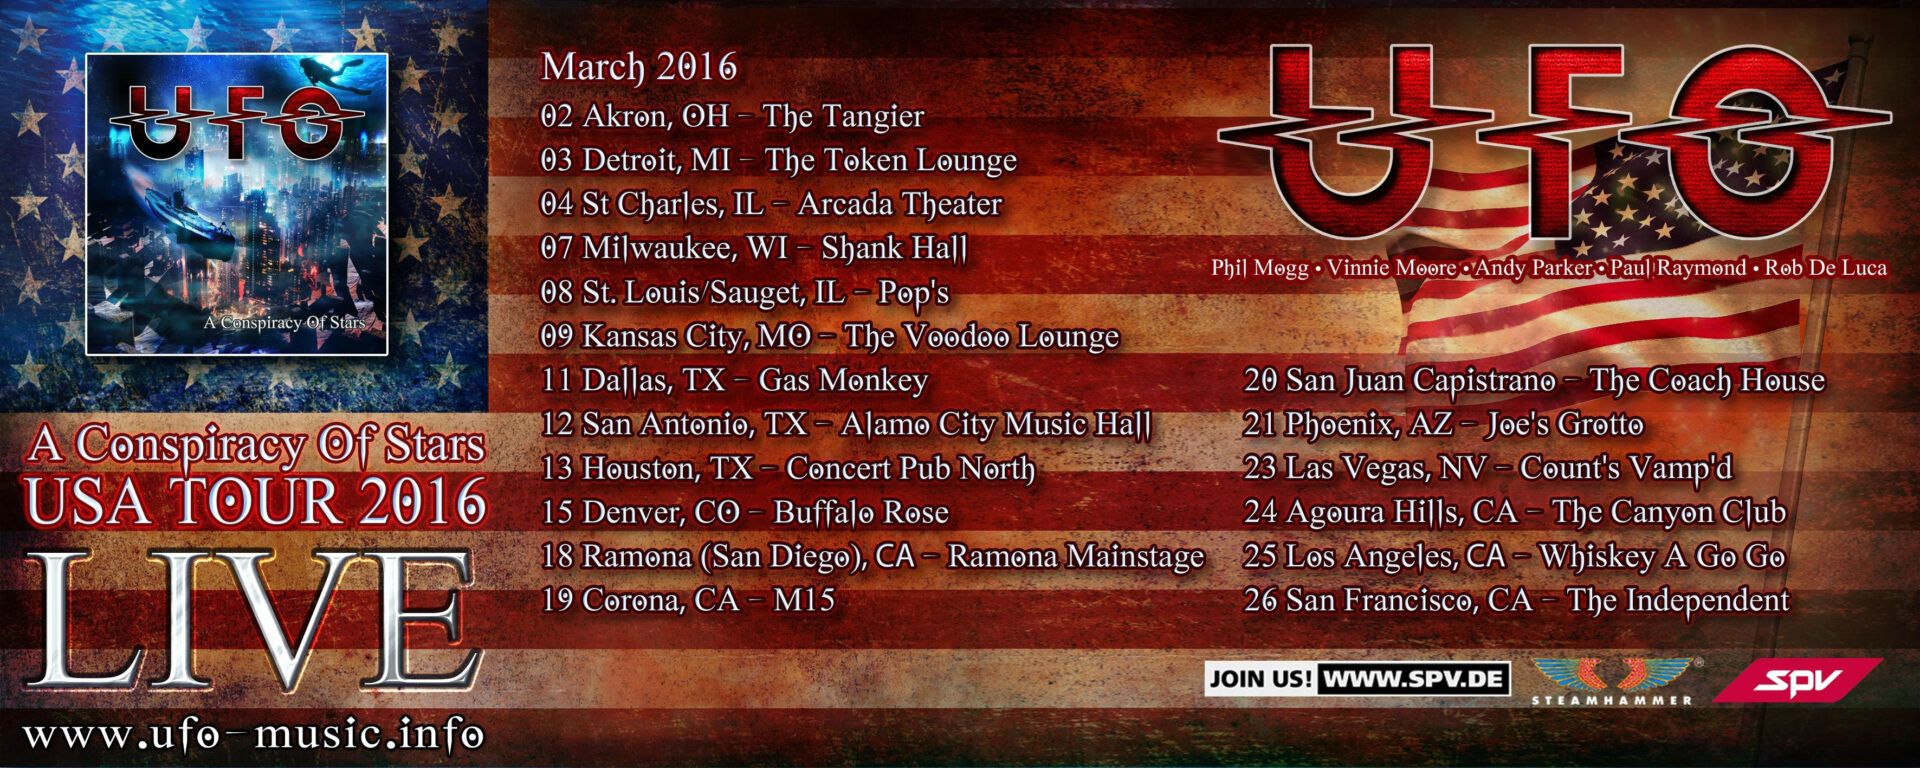 UFO - Conspiracy of Stars - 2016 Tour Poster